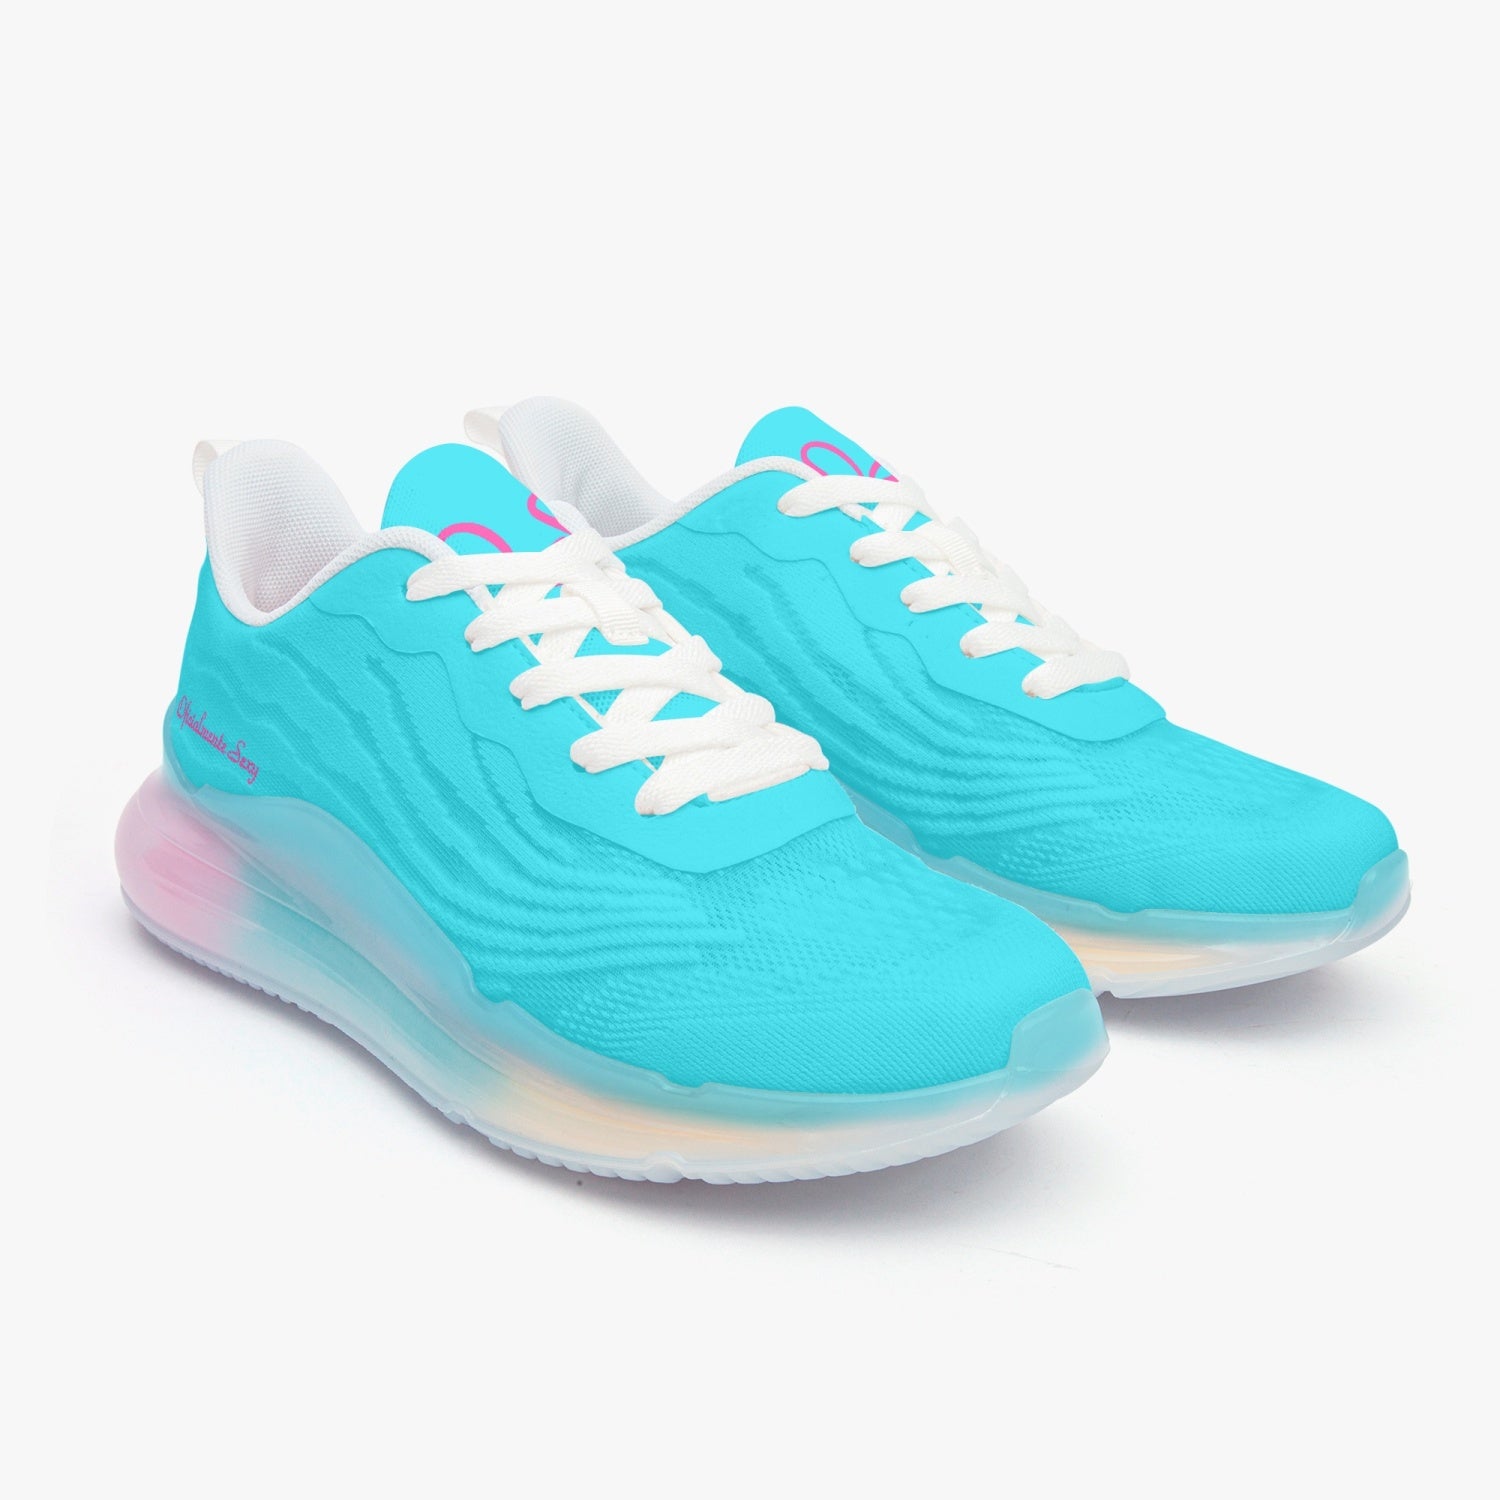 Oficialmente Sexy Turquoises Blue Lightweight Air Cushion Sneakers